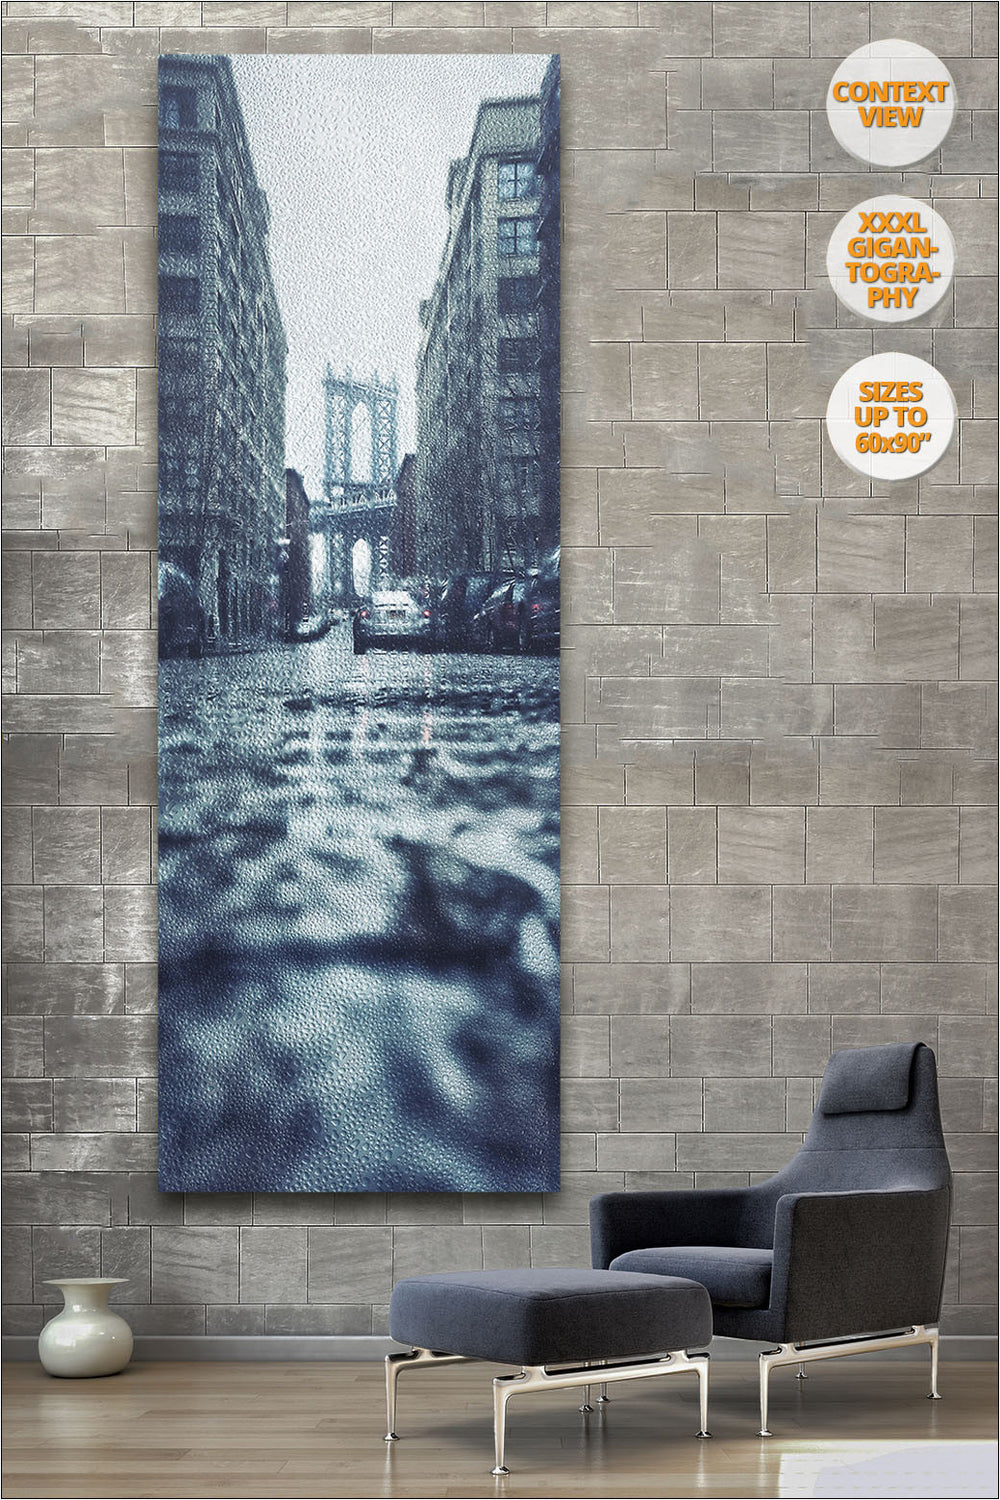 Manhattan Bridge in the rain, NYC. | Limited Edition Giant Print hanged in reading room.